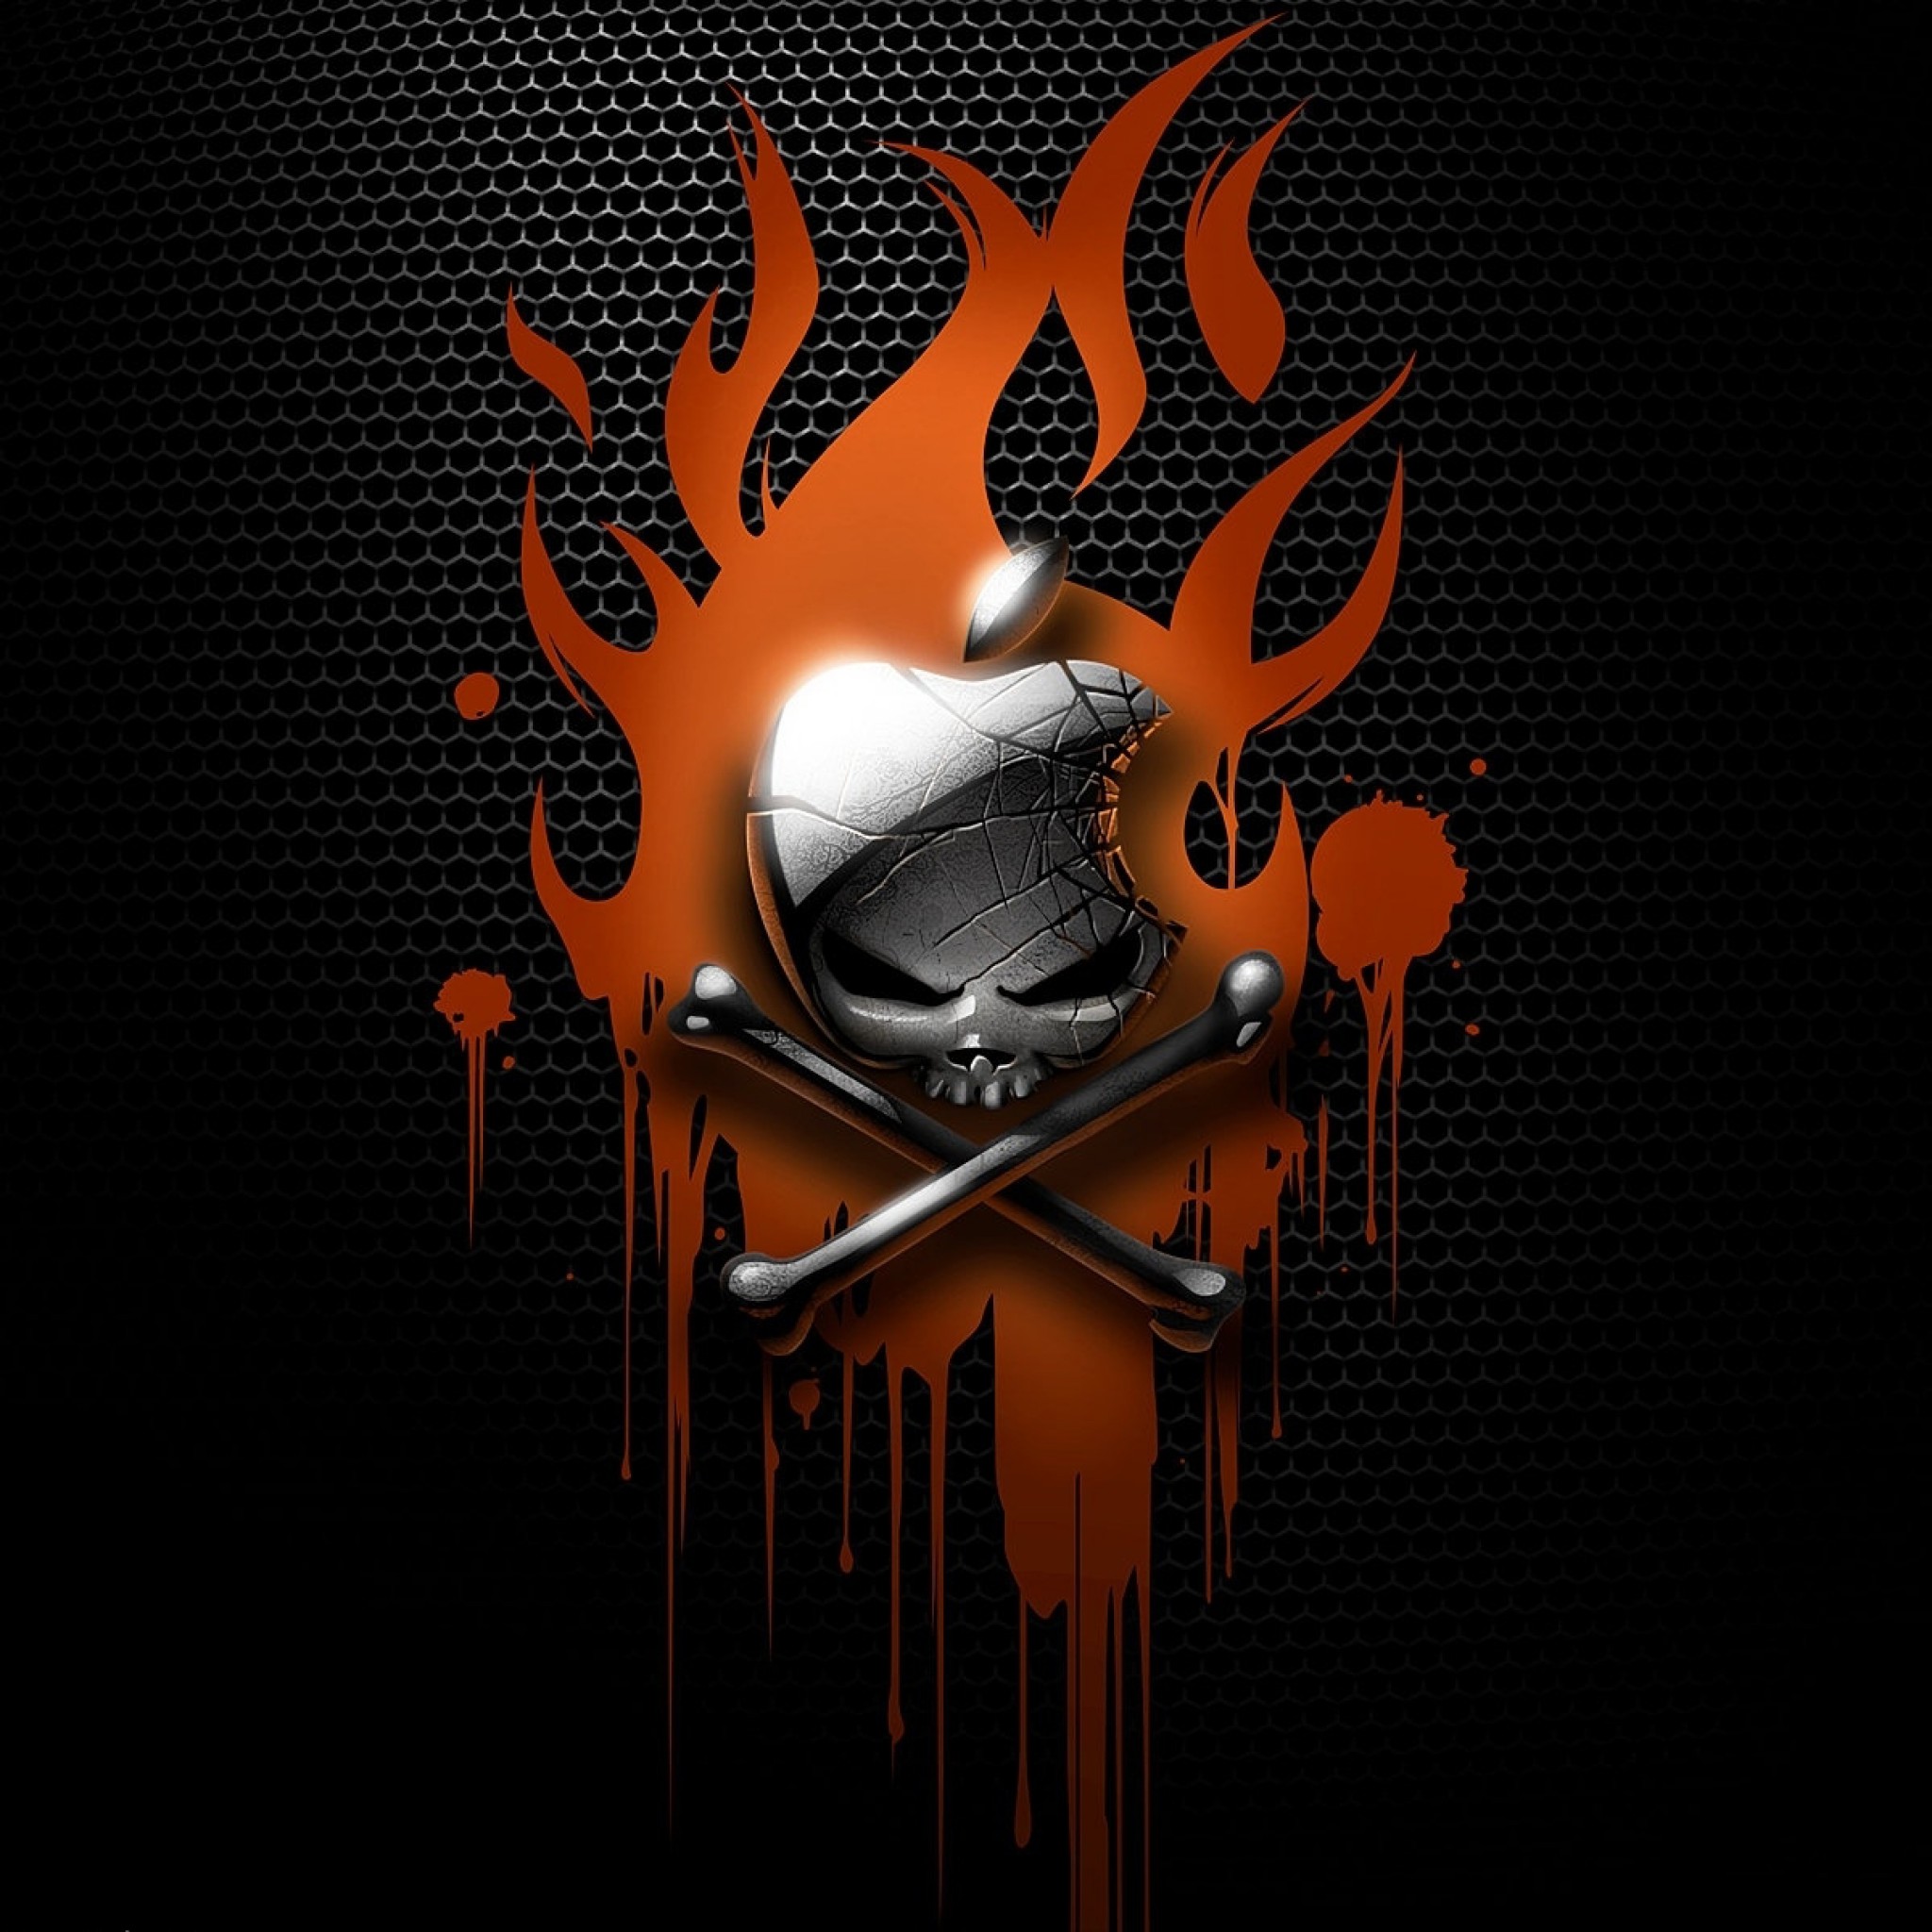 Fantasy Scary Silver Skull Apple Logo Theme In Red Burning Fire